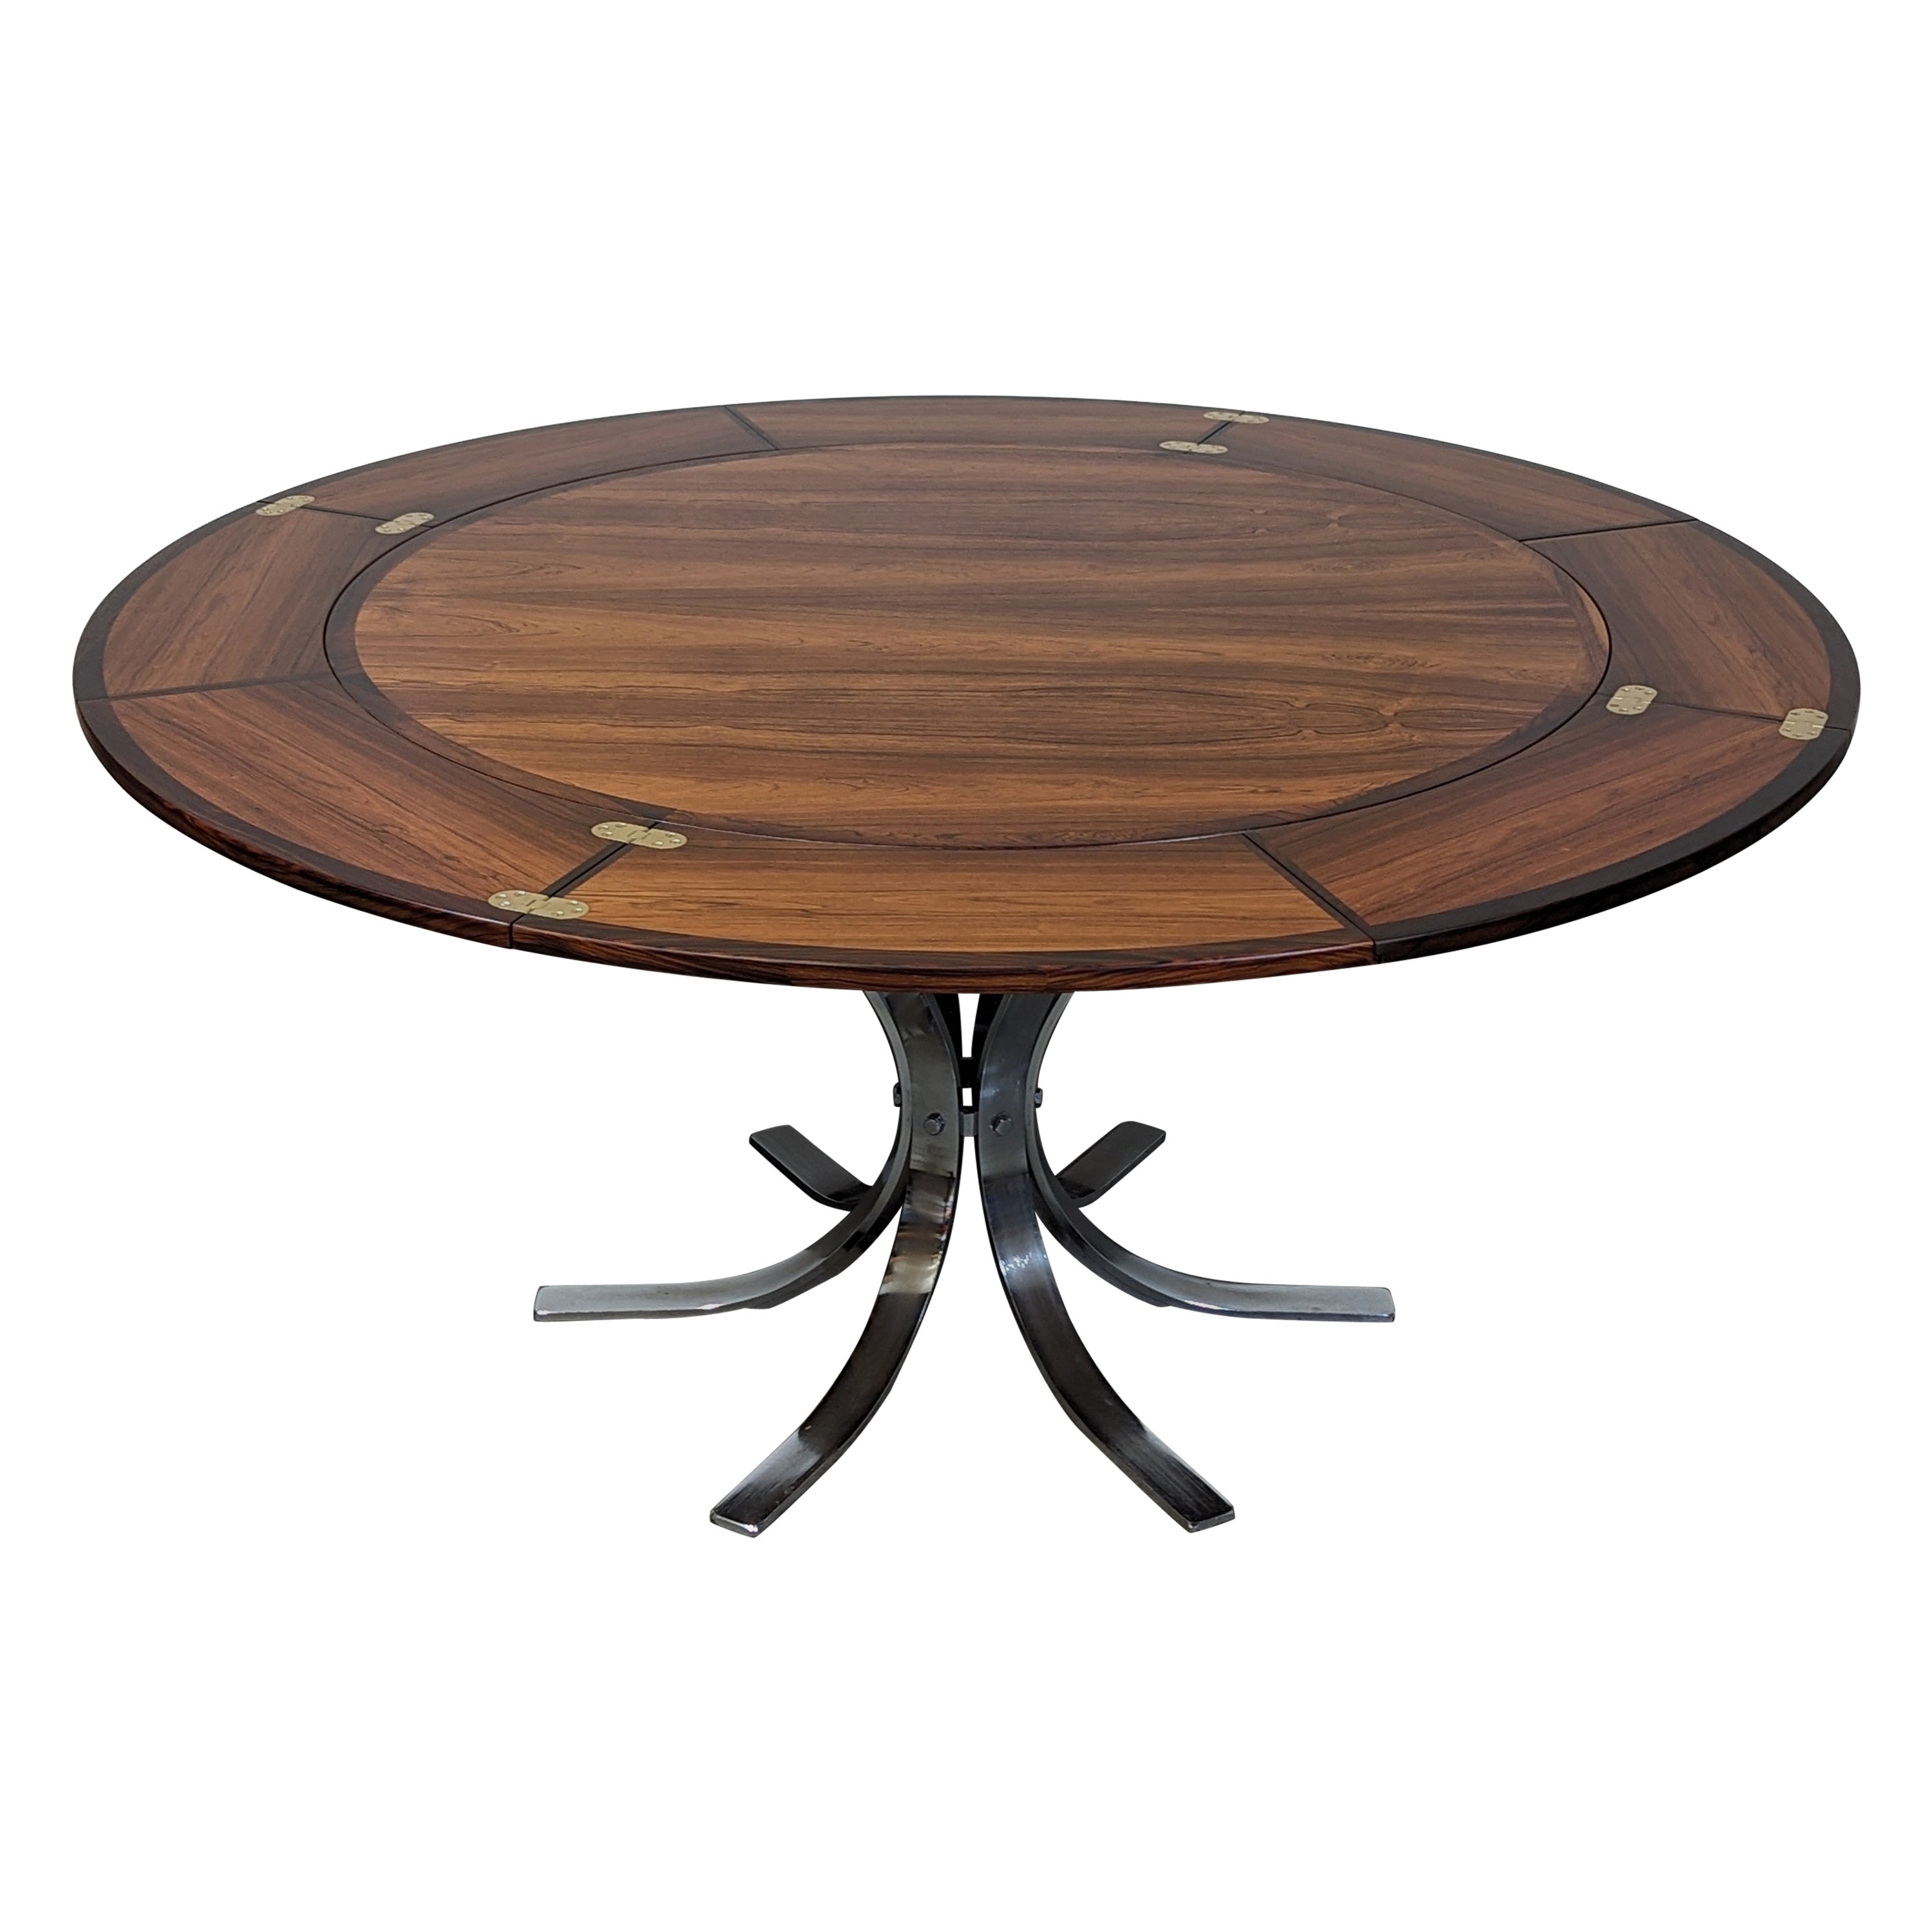 Danish Mid Century Rosewood Flip Flap Circular Dining Table by Dyrlund, c1960s For Sale